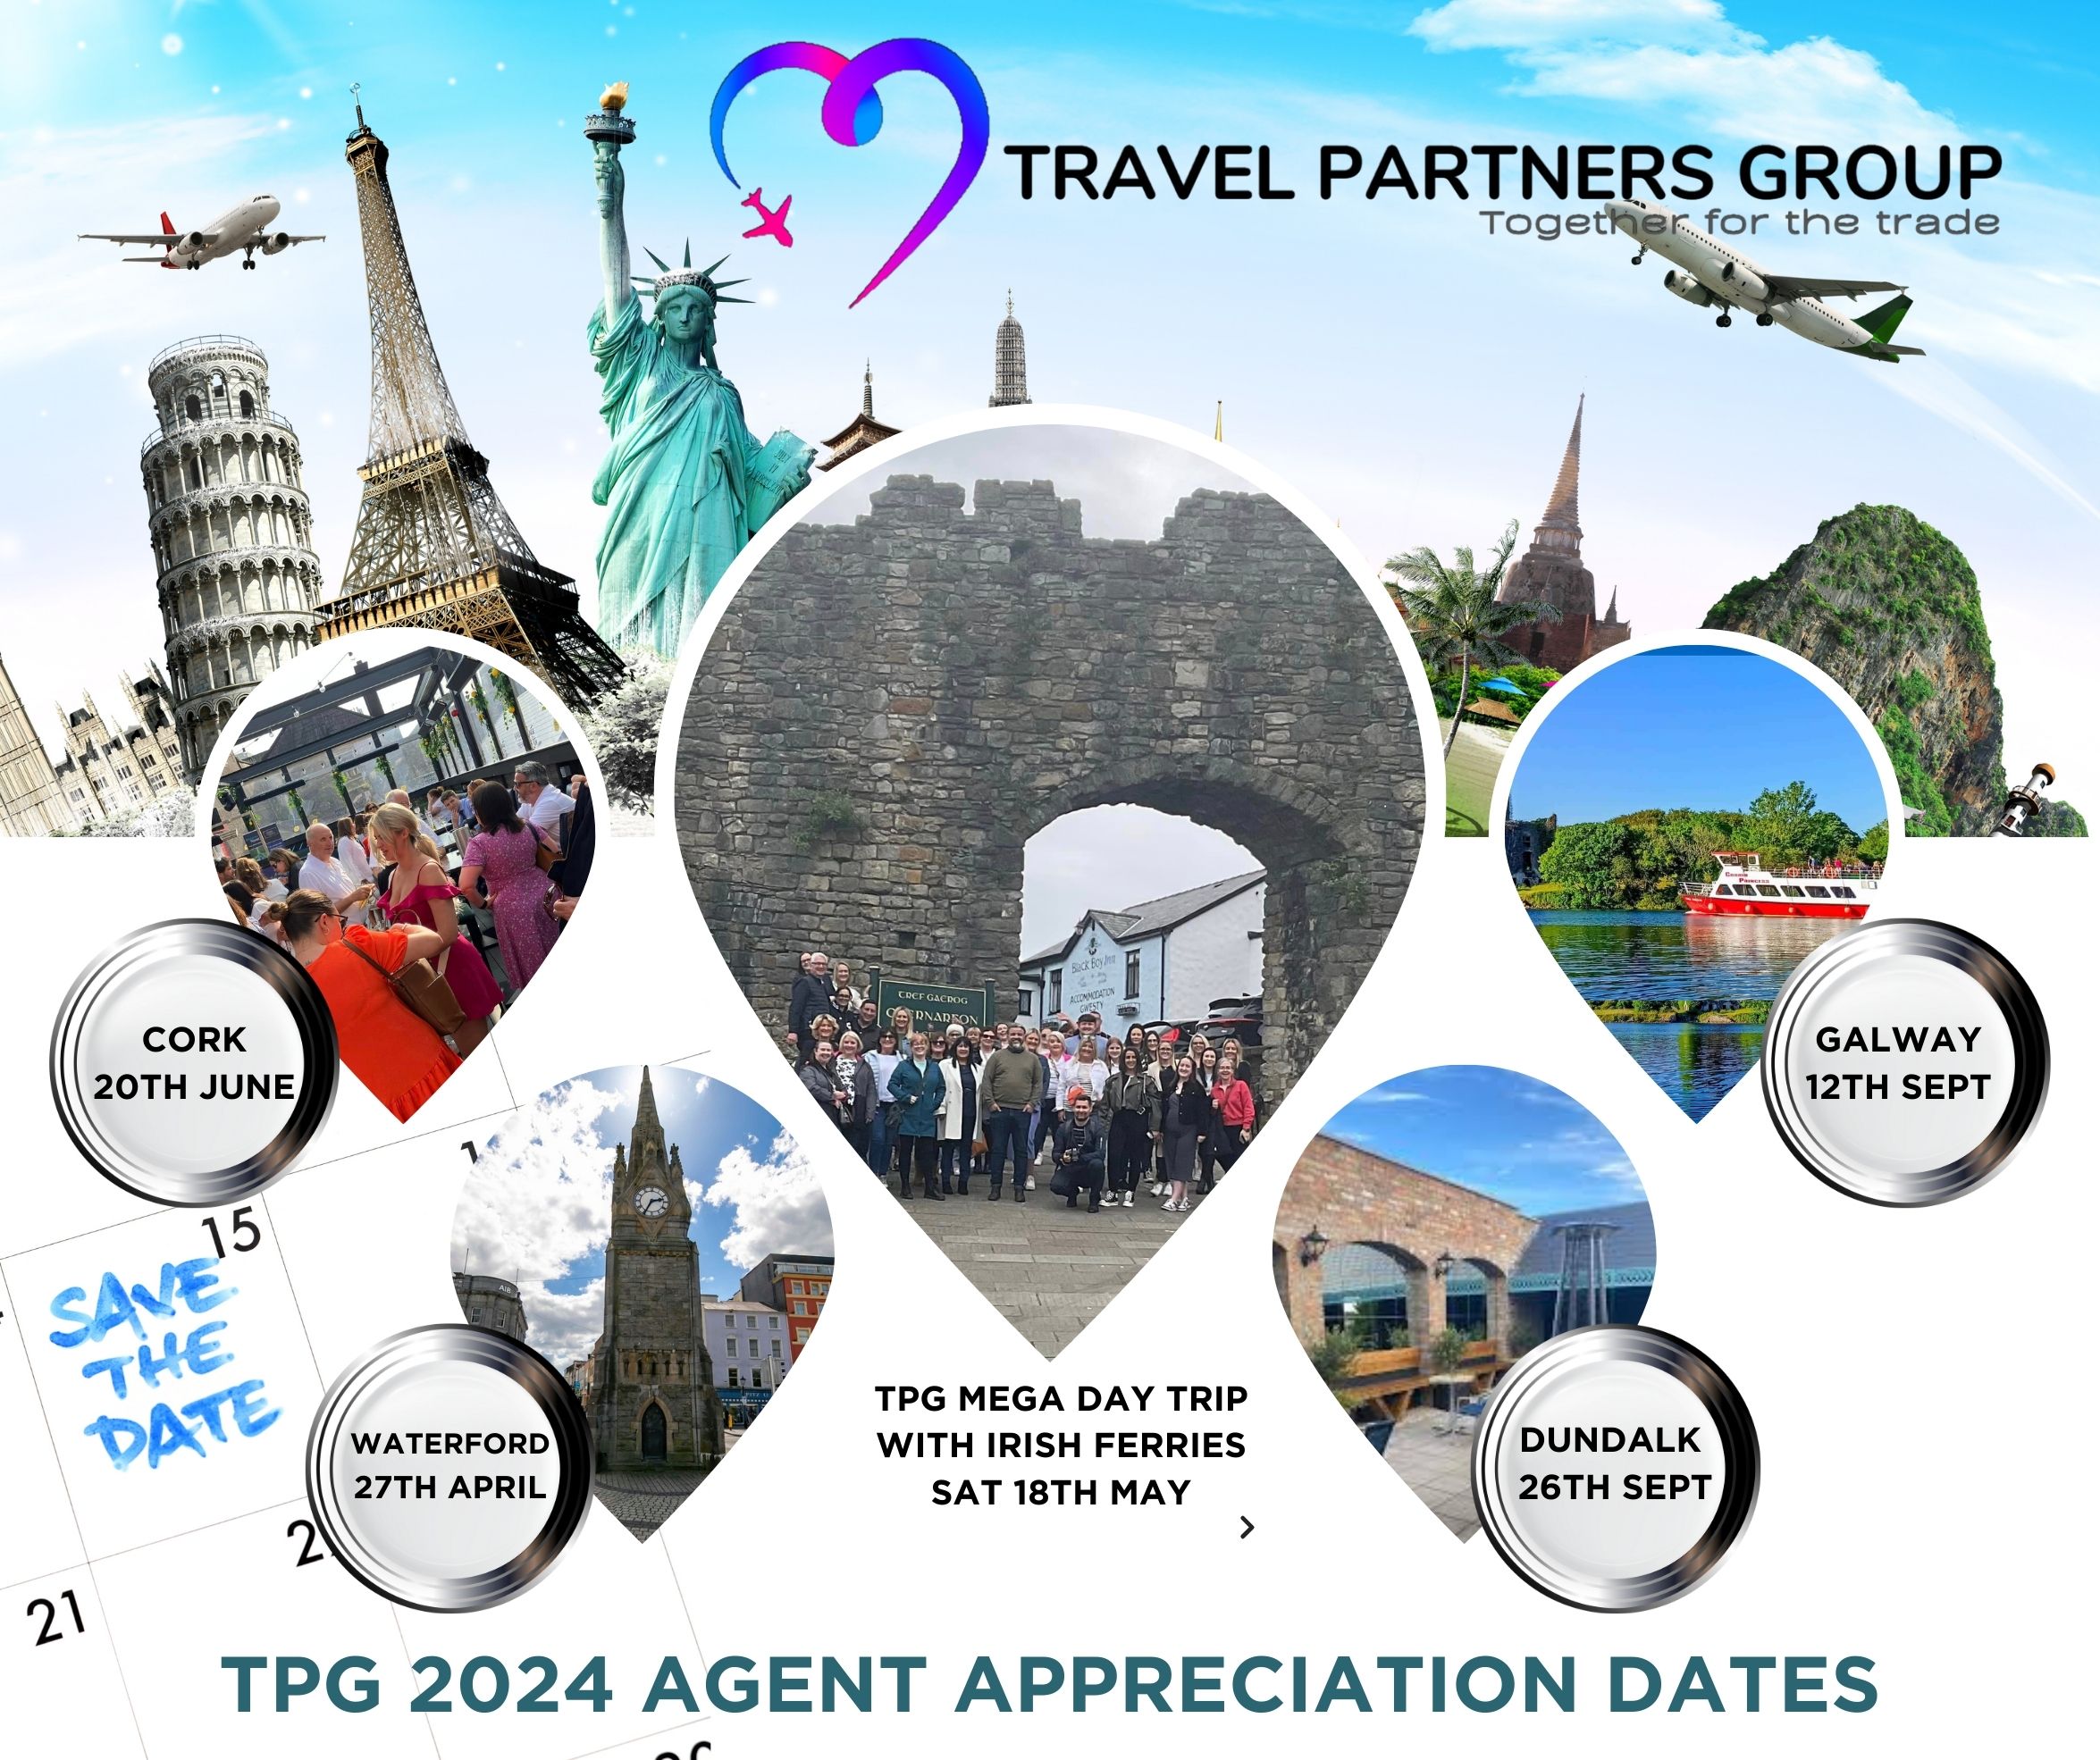 TPG announce dates for their 2024 Agent Appreciation Events